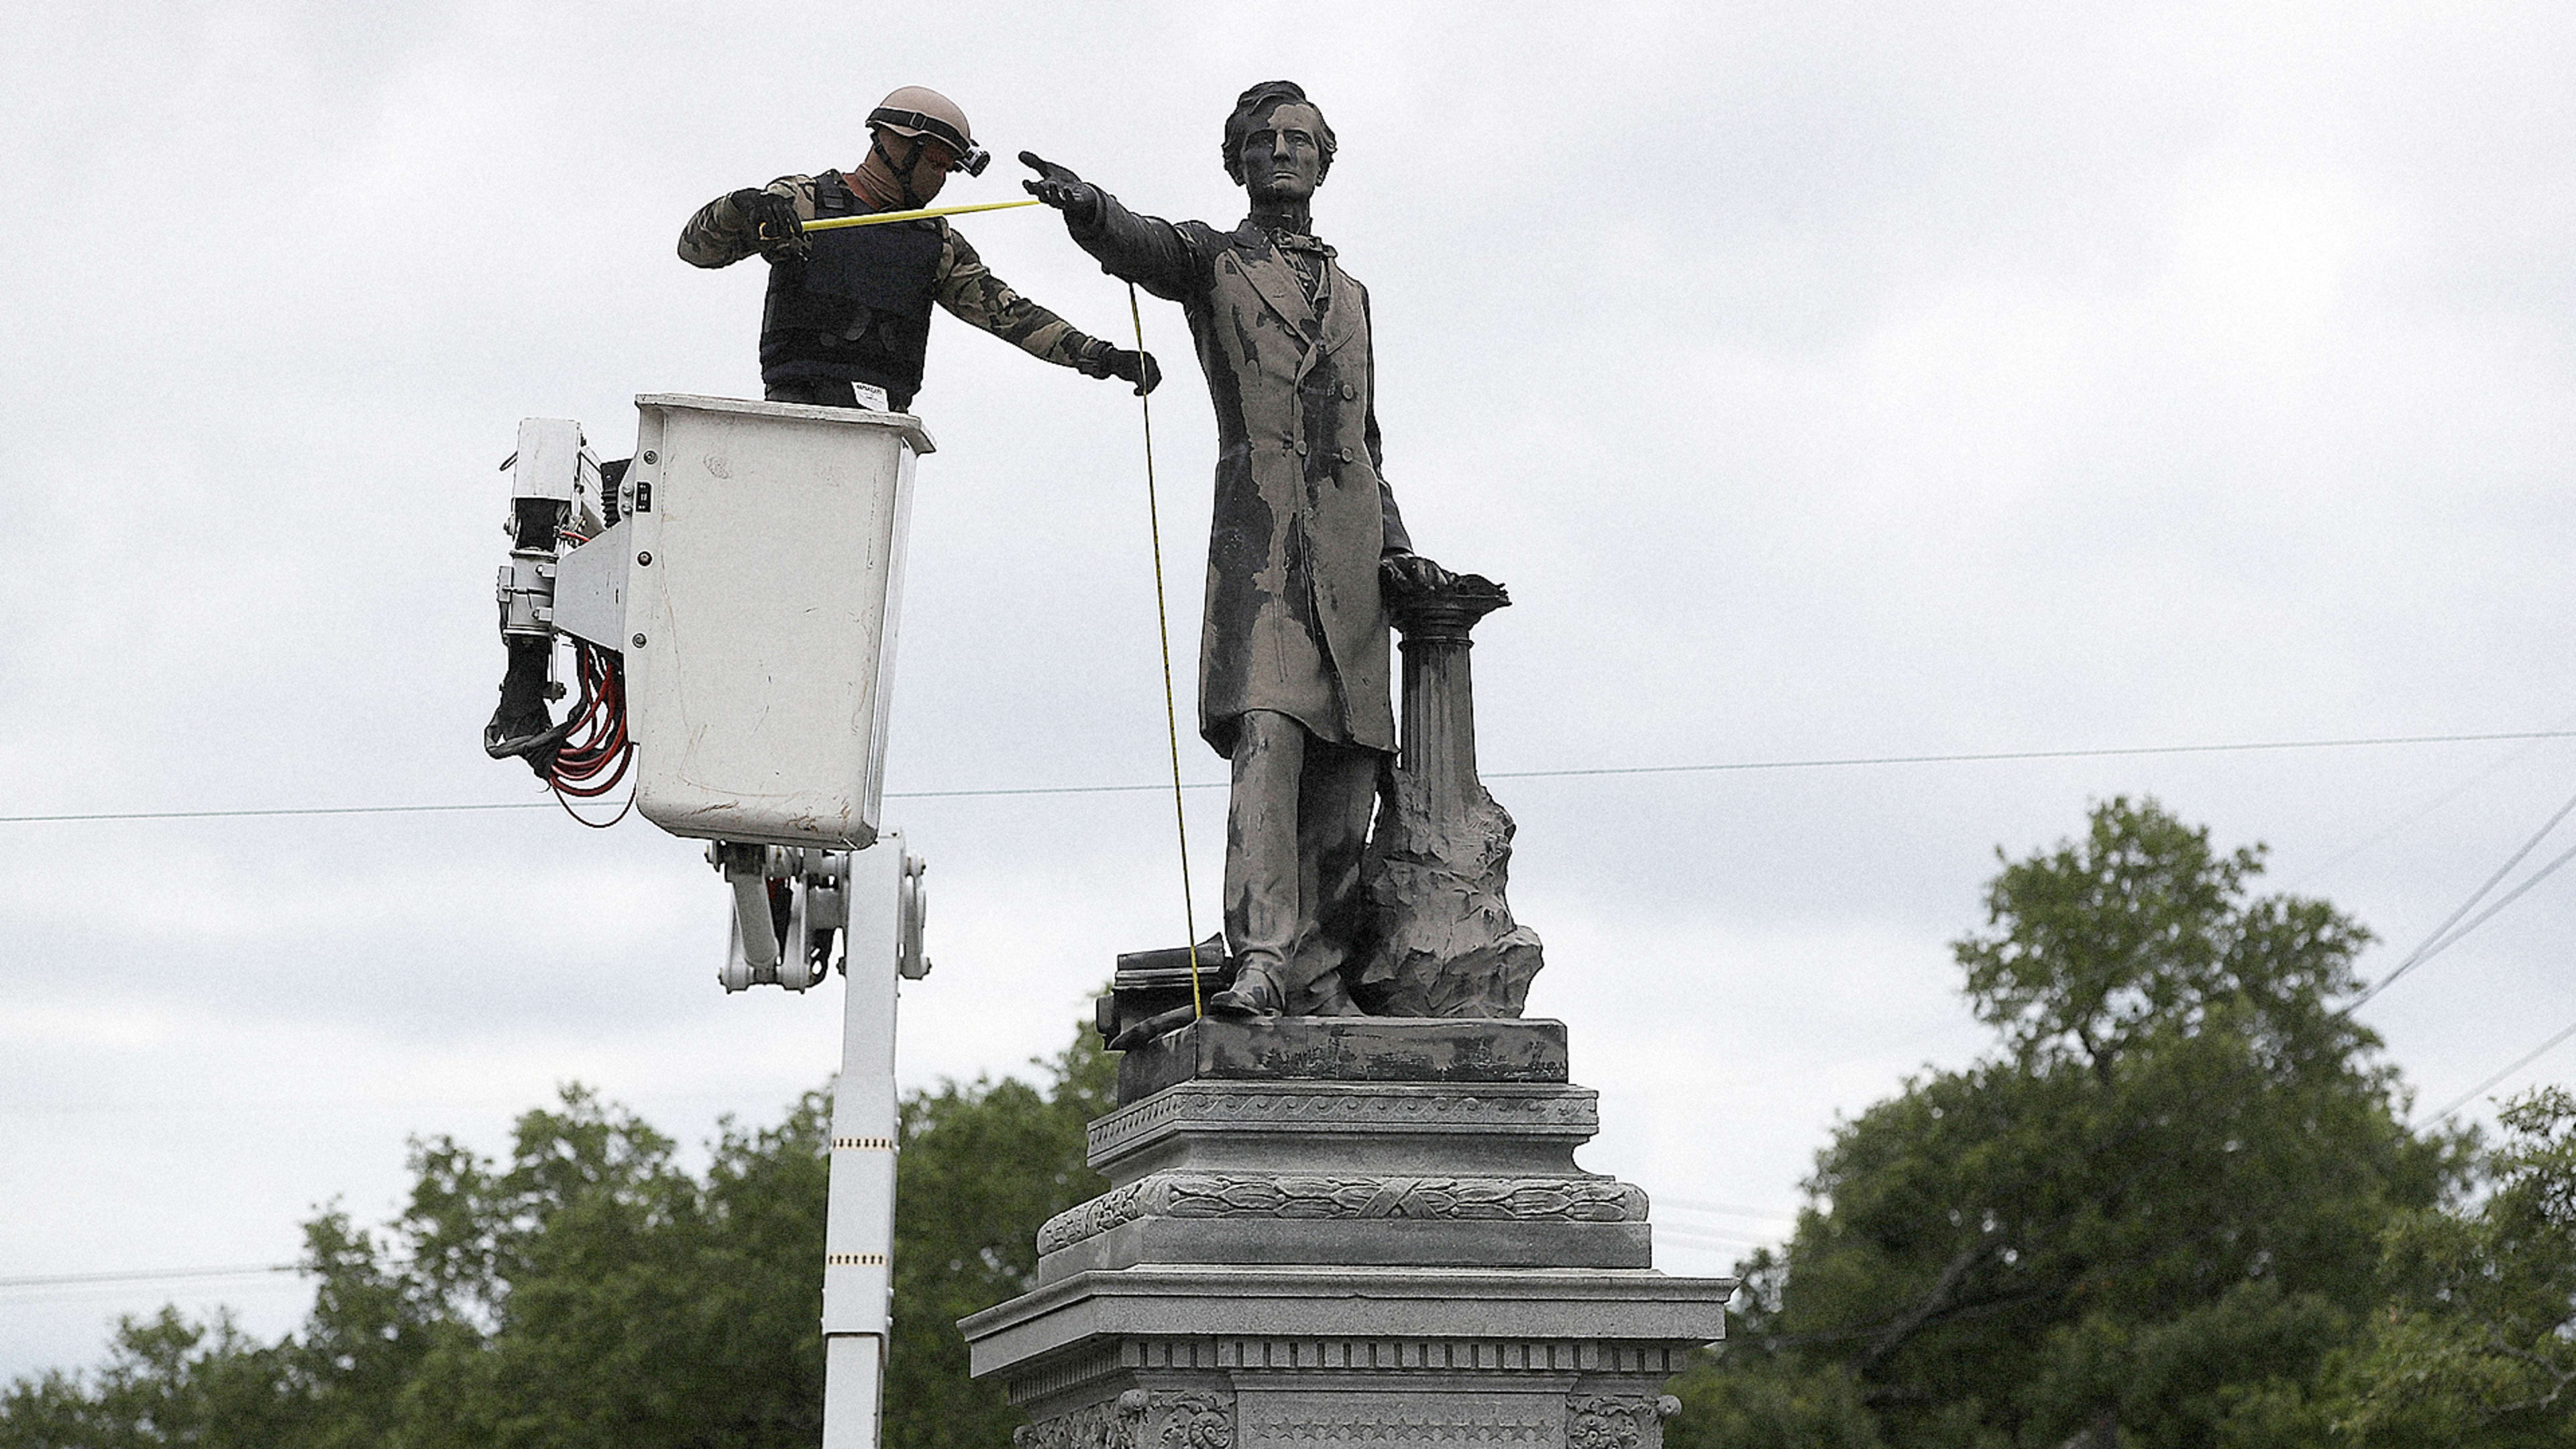 Anonymous donors are dismantling Confederate statues